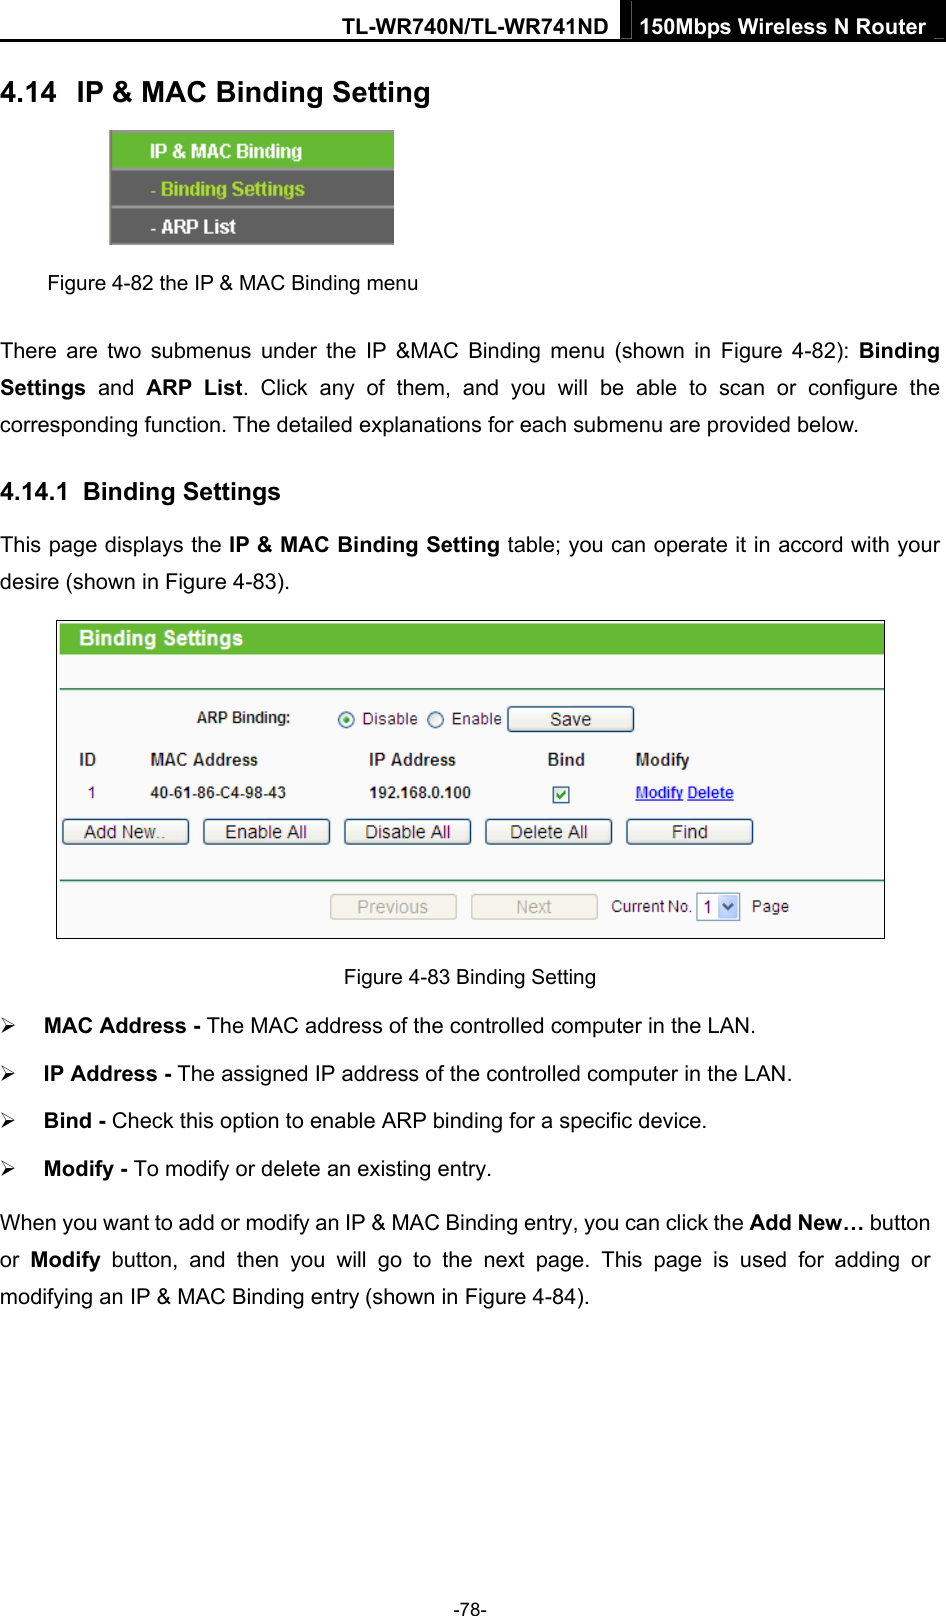 TL-WR740N/TL-WR741ND 150Mbps Wireless N Router  -78- 4.14  IP &amp; MAC Binding Setting  Figure 4-82 the IP &amp; MAC Binding menu There are two submenus under the IP &amp;MAC Binding menu (shown in Figure 4-82): Binding Settings  and ARP List. Click any of them, and you will be able to scan or configure the corresponding function. The detailed explanations for each submenu are provided below. 4.14.1  Binding Settings This page displays the IP &amp; MAC Binding Setting table; you can operate it in accord with your desire (shown in Figure 4-83).    Figure 4-83 Binding Setting ¾ MAC Address - The MAC address of the controlled computer in the LAN.   ¾ IP Address - The assigned IP address of the controlled computer in the LAN.   ¾ Bind - Check this option to enable ARP binding for a specific device.   ¾ Modify - To modify or delete an existing entry.   When you want to add or modify an IP &amp; MAC Binding entry, you can click the Add New… button or  Modify button, and then you will go to the next page. This page is used for adding or modifying an IP &amp; MAC Binding entry (shown in Figure 4-84).   